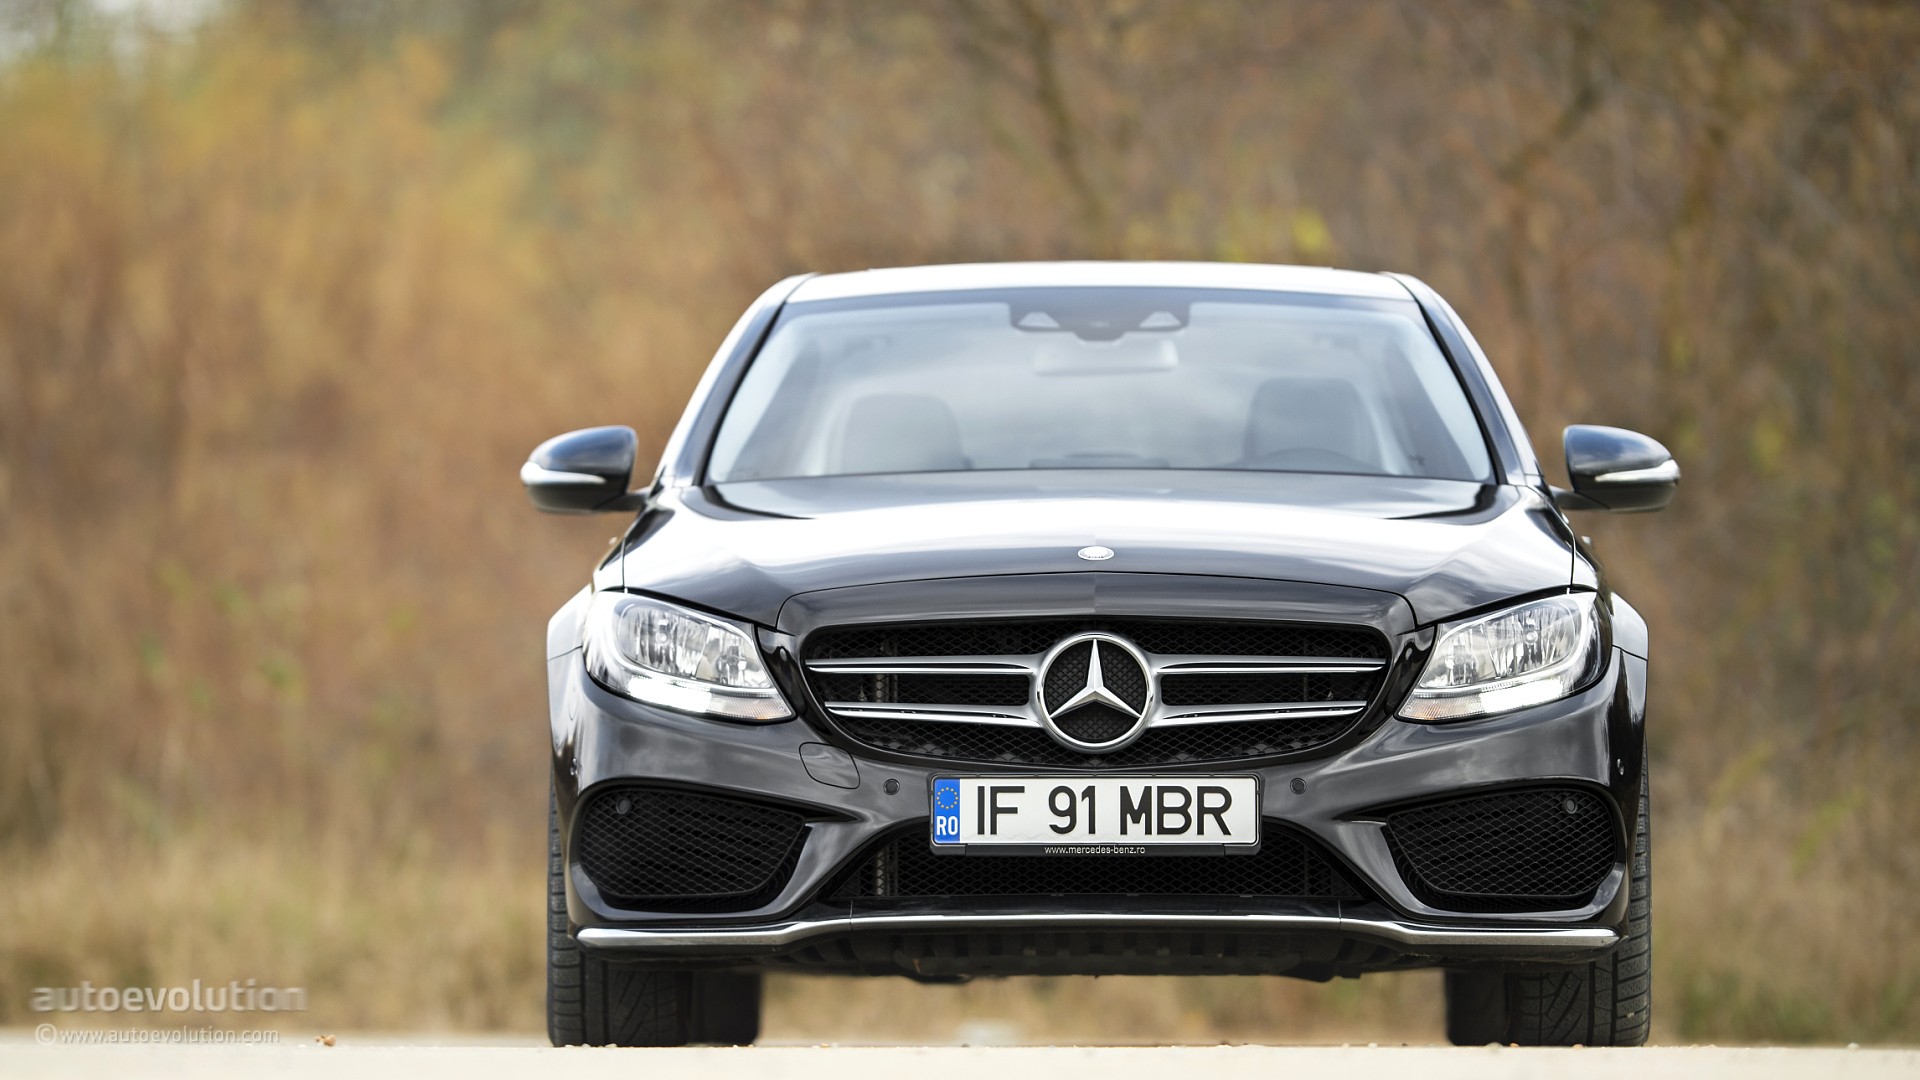 Mercedes Benz C Class HD Wallpaper They Call It Baby S